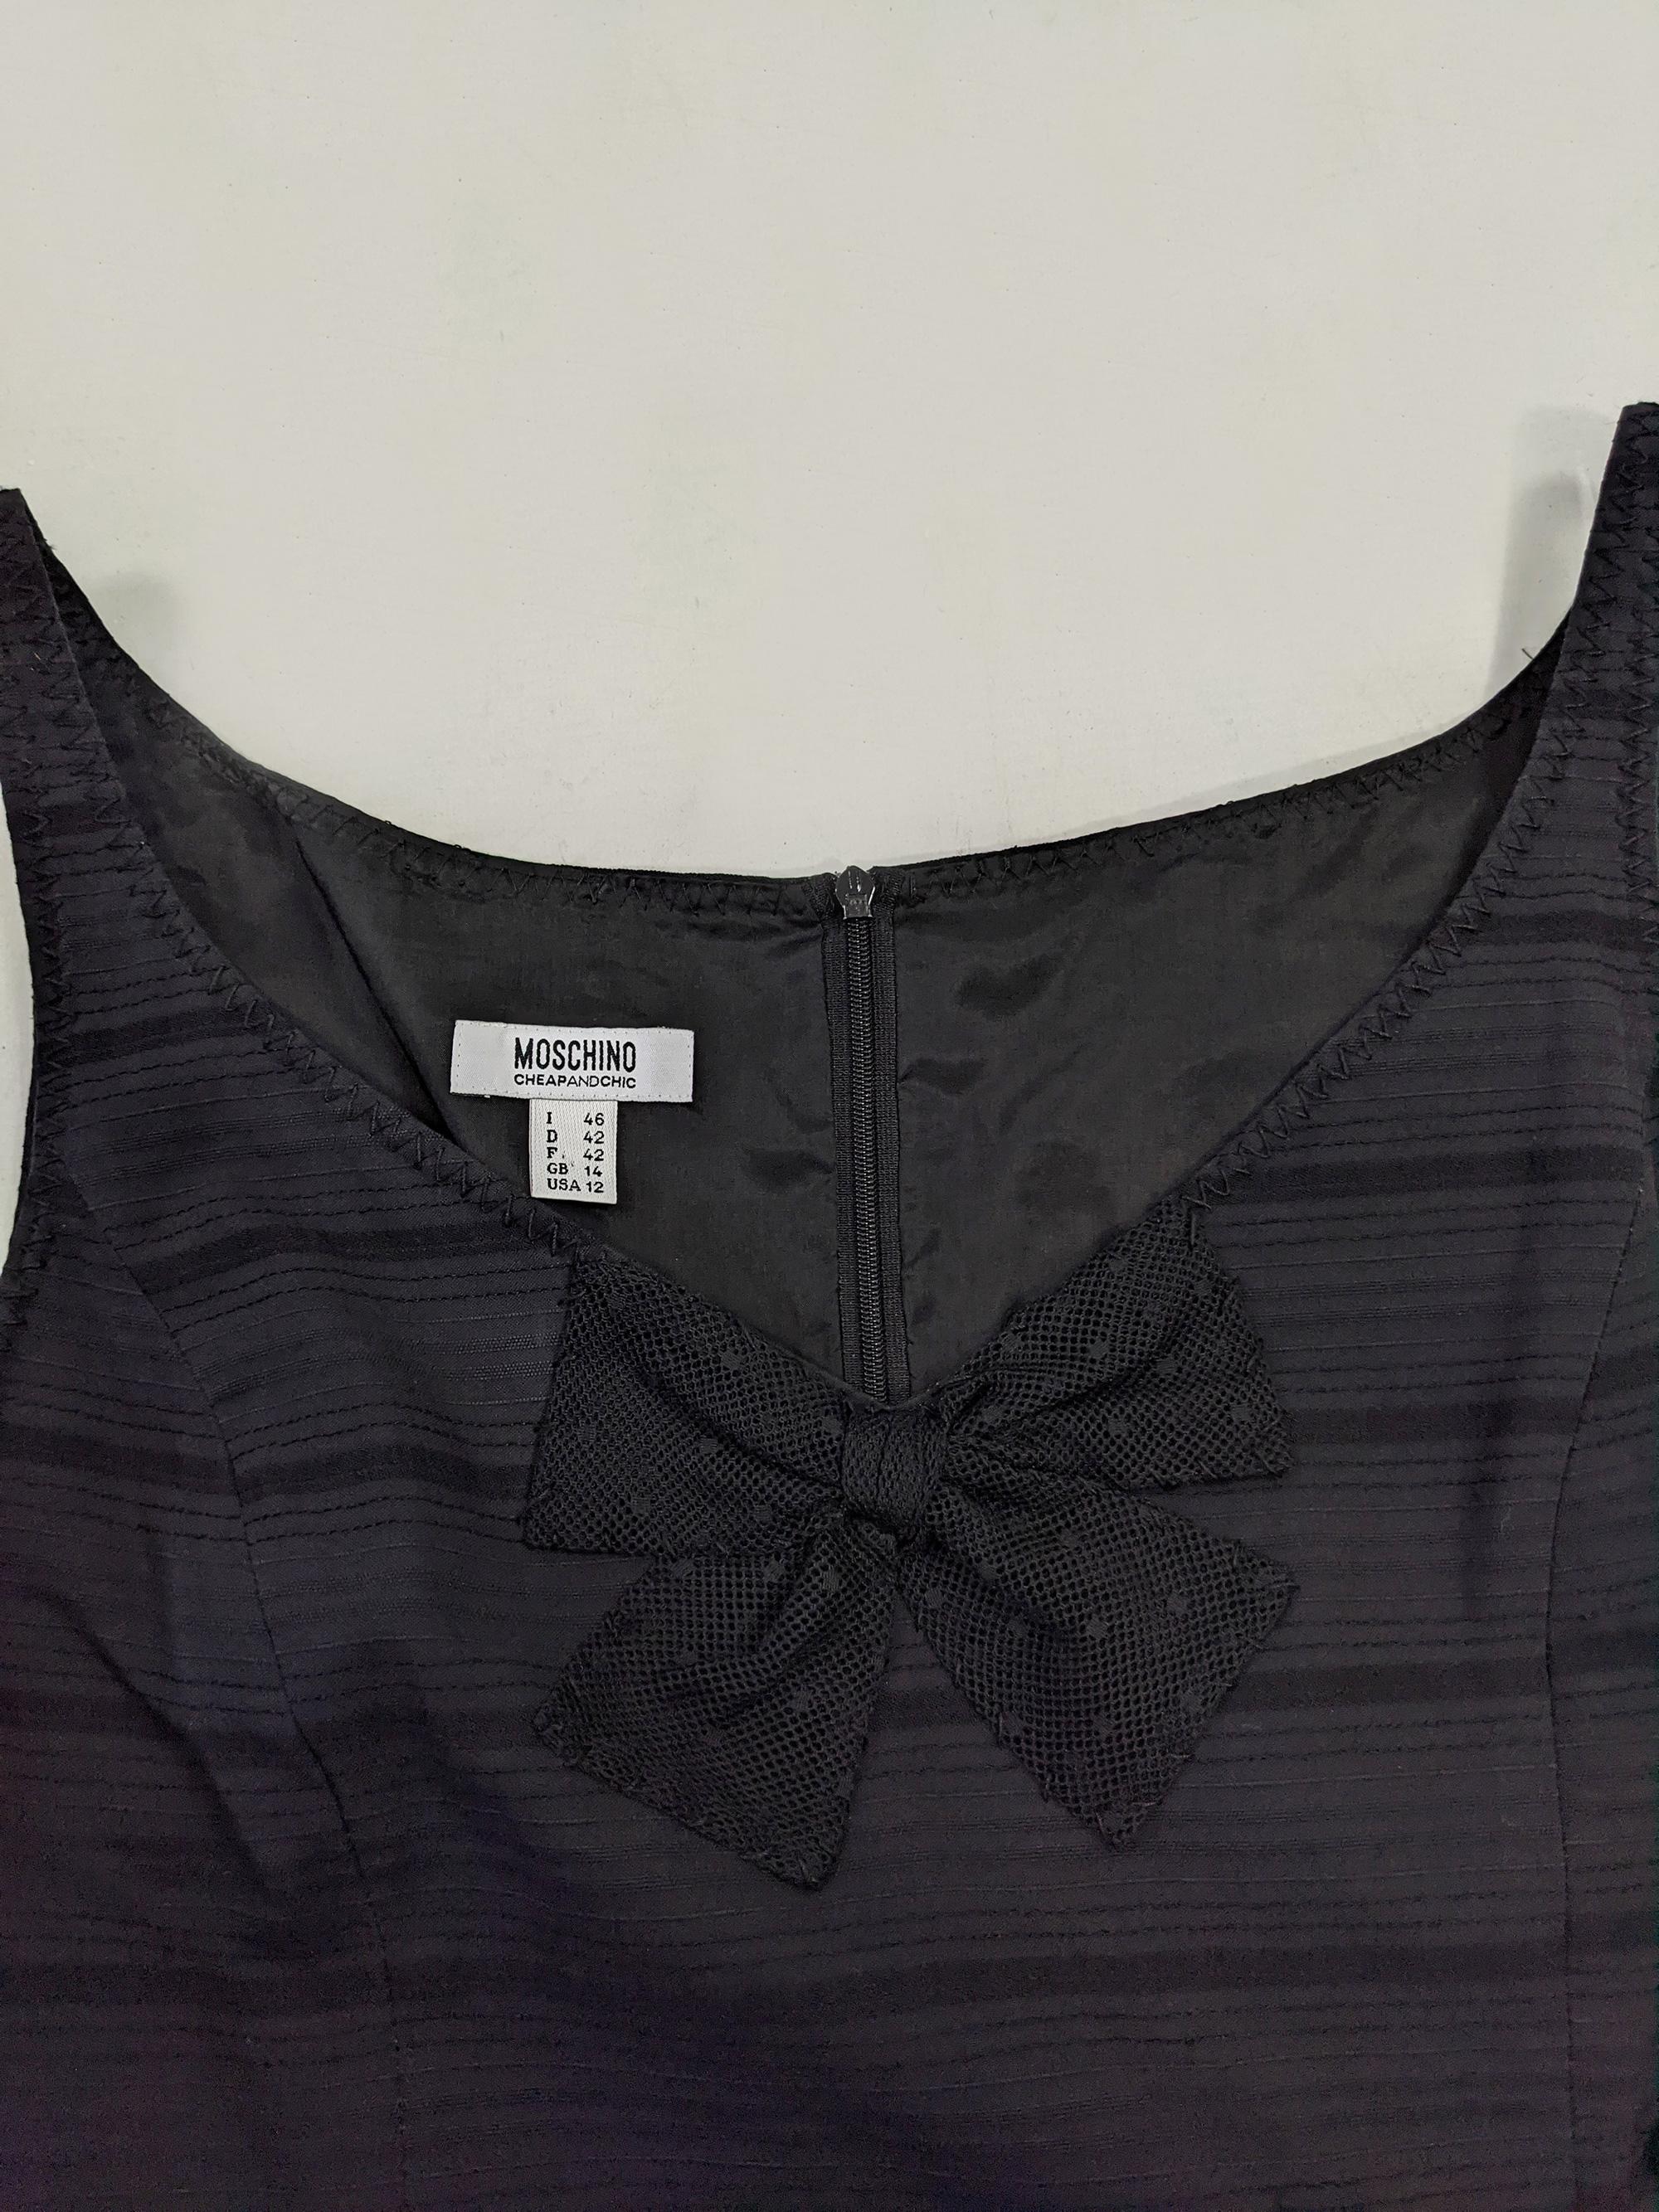 Moschino Vintage 90s Cute Black Bow Appliqué Sleeveless Party Dress, 1990s 5